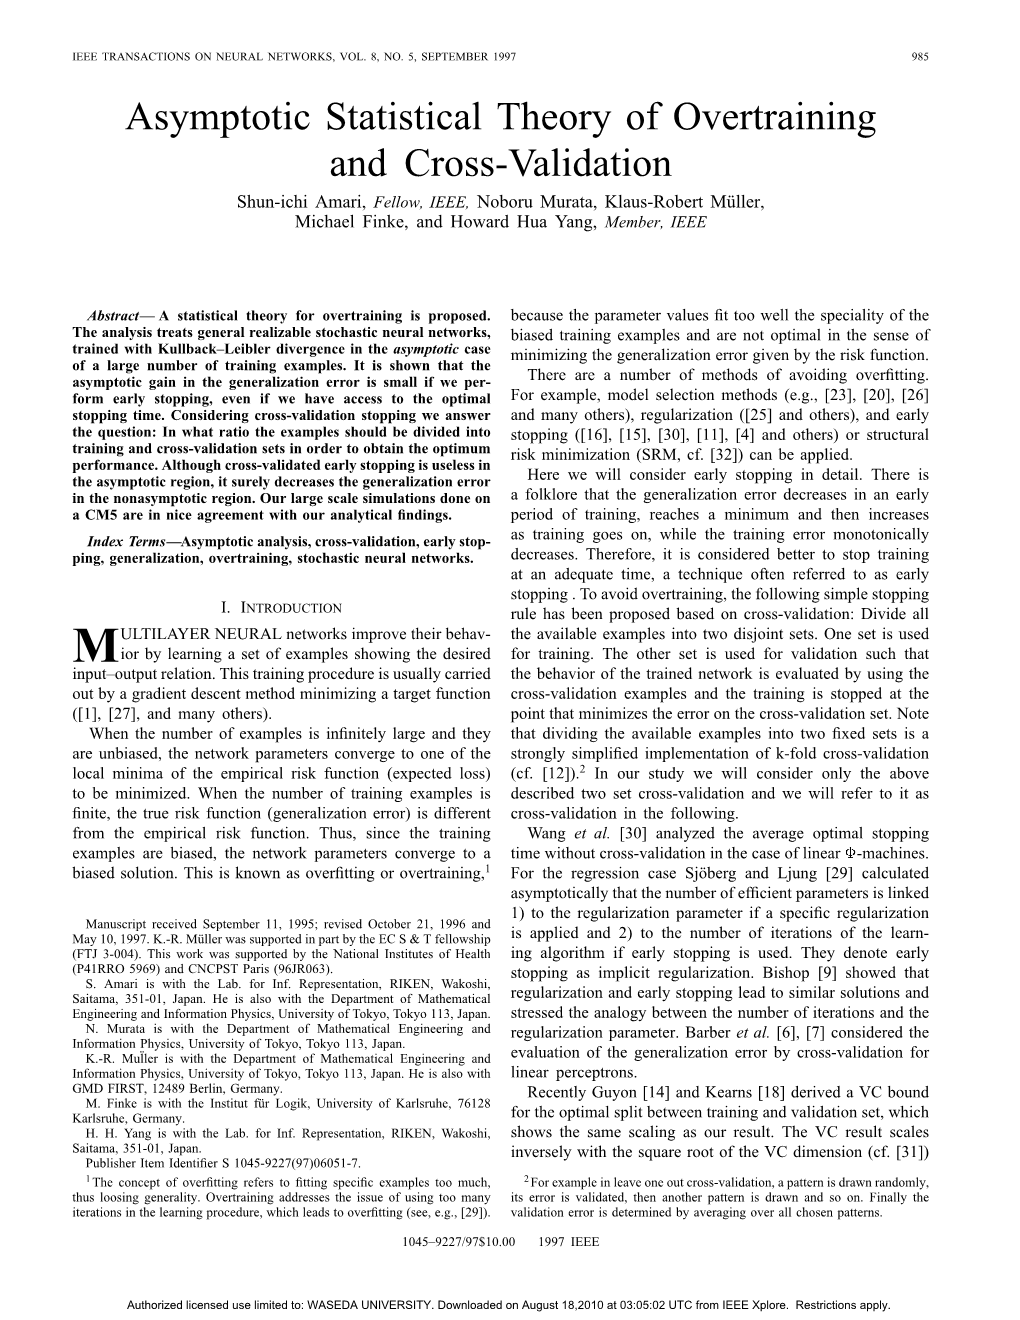 Asymptotic Statistical Theory of Overtraining and Cross-Validation